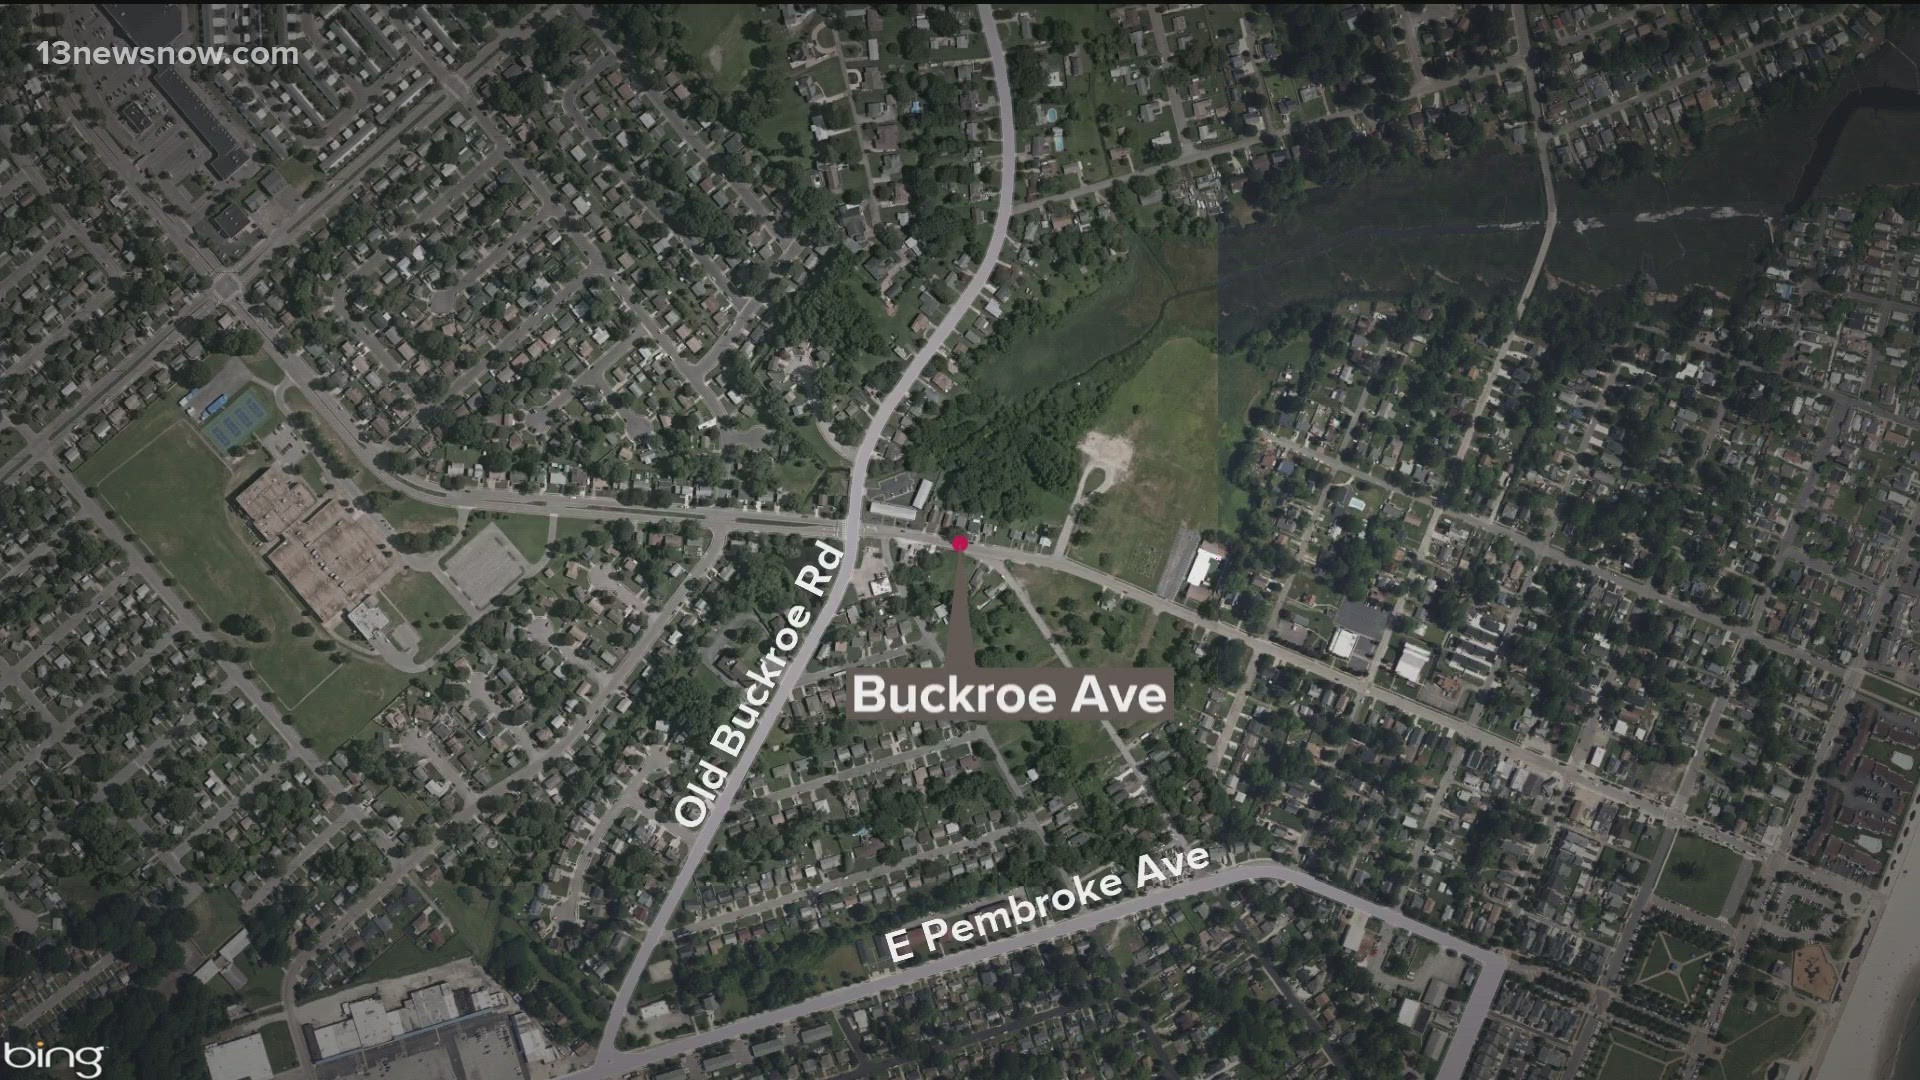 Police found him shot on Buckroe Avenue shortly after 4 p.m. Tuesday.